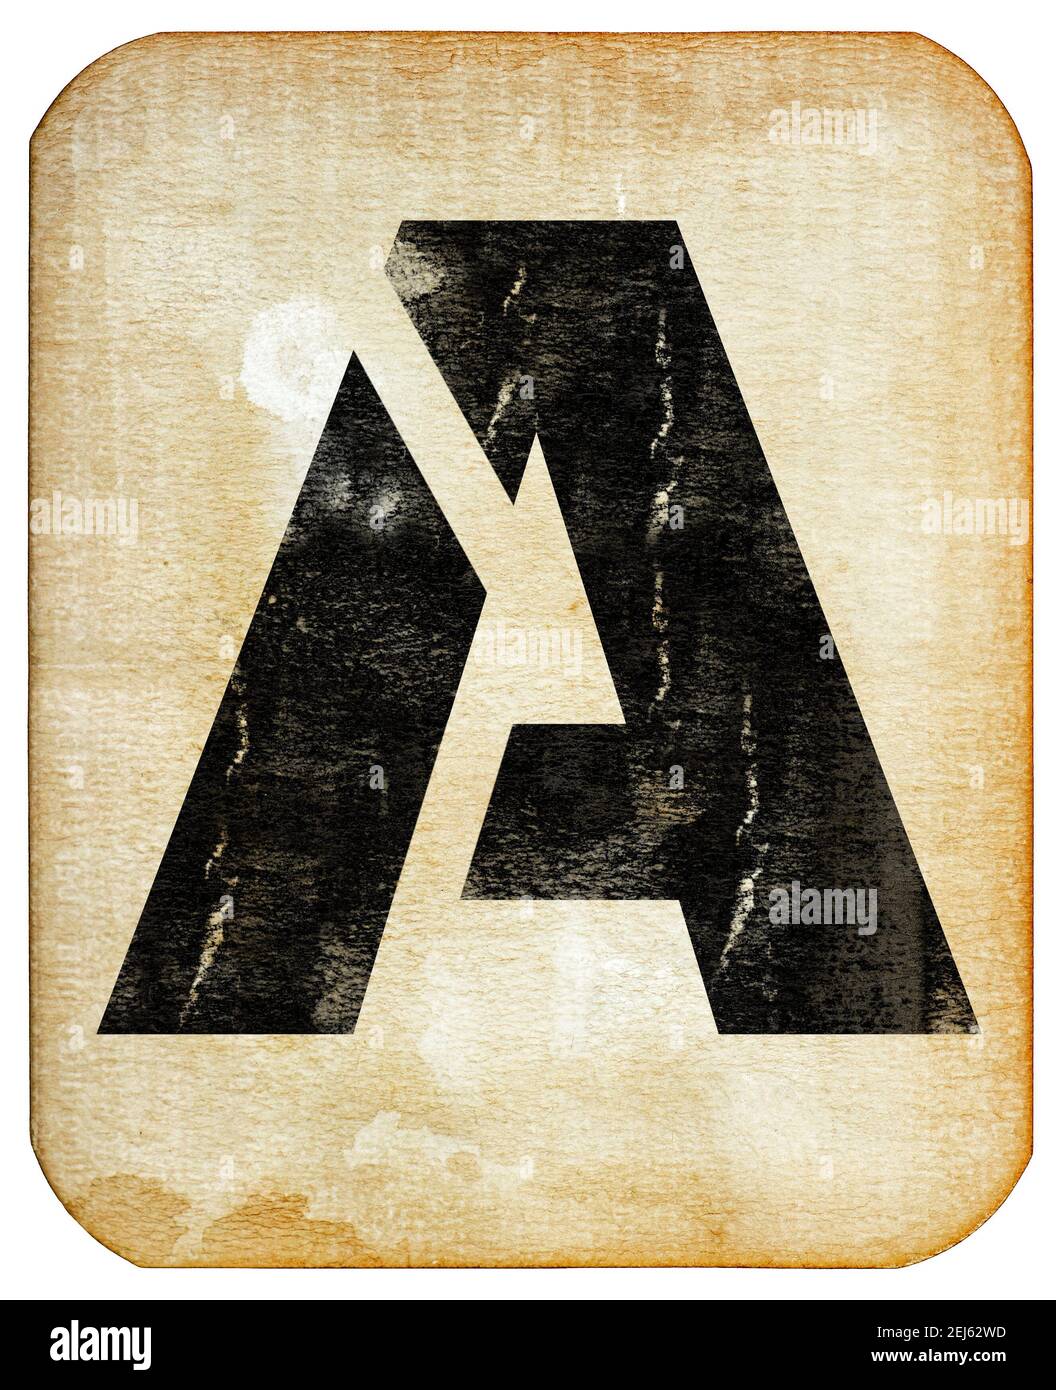 Letter A. Used cardboard sign. Old stained paper texture background Stock Photo